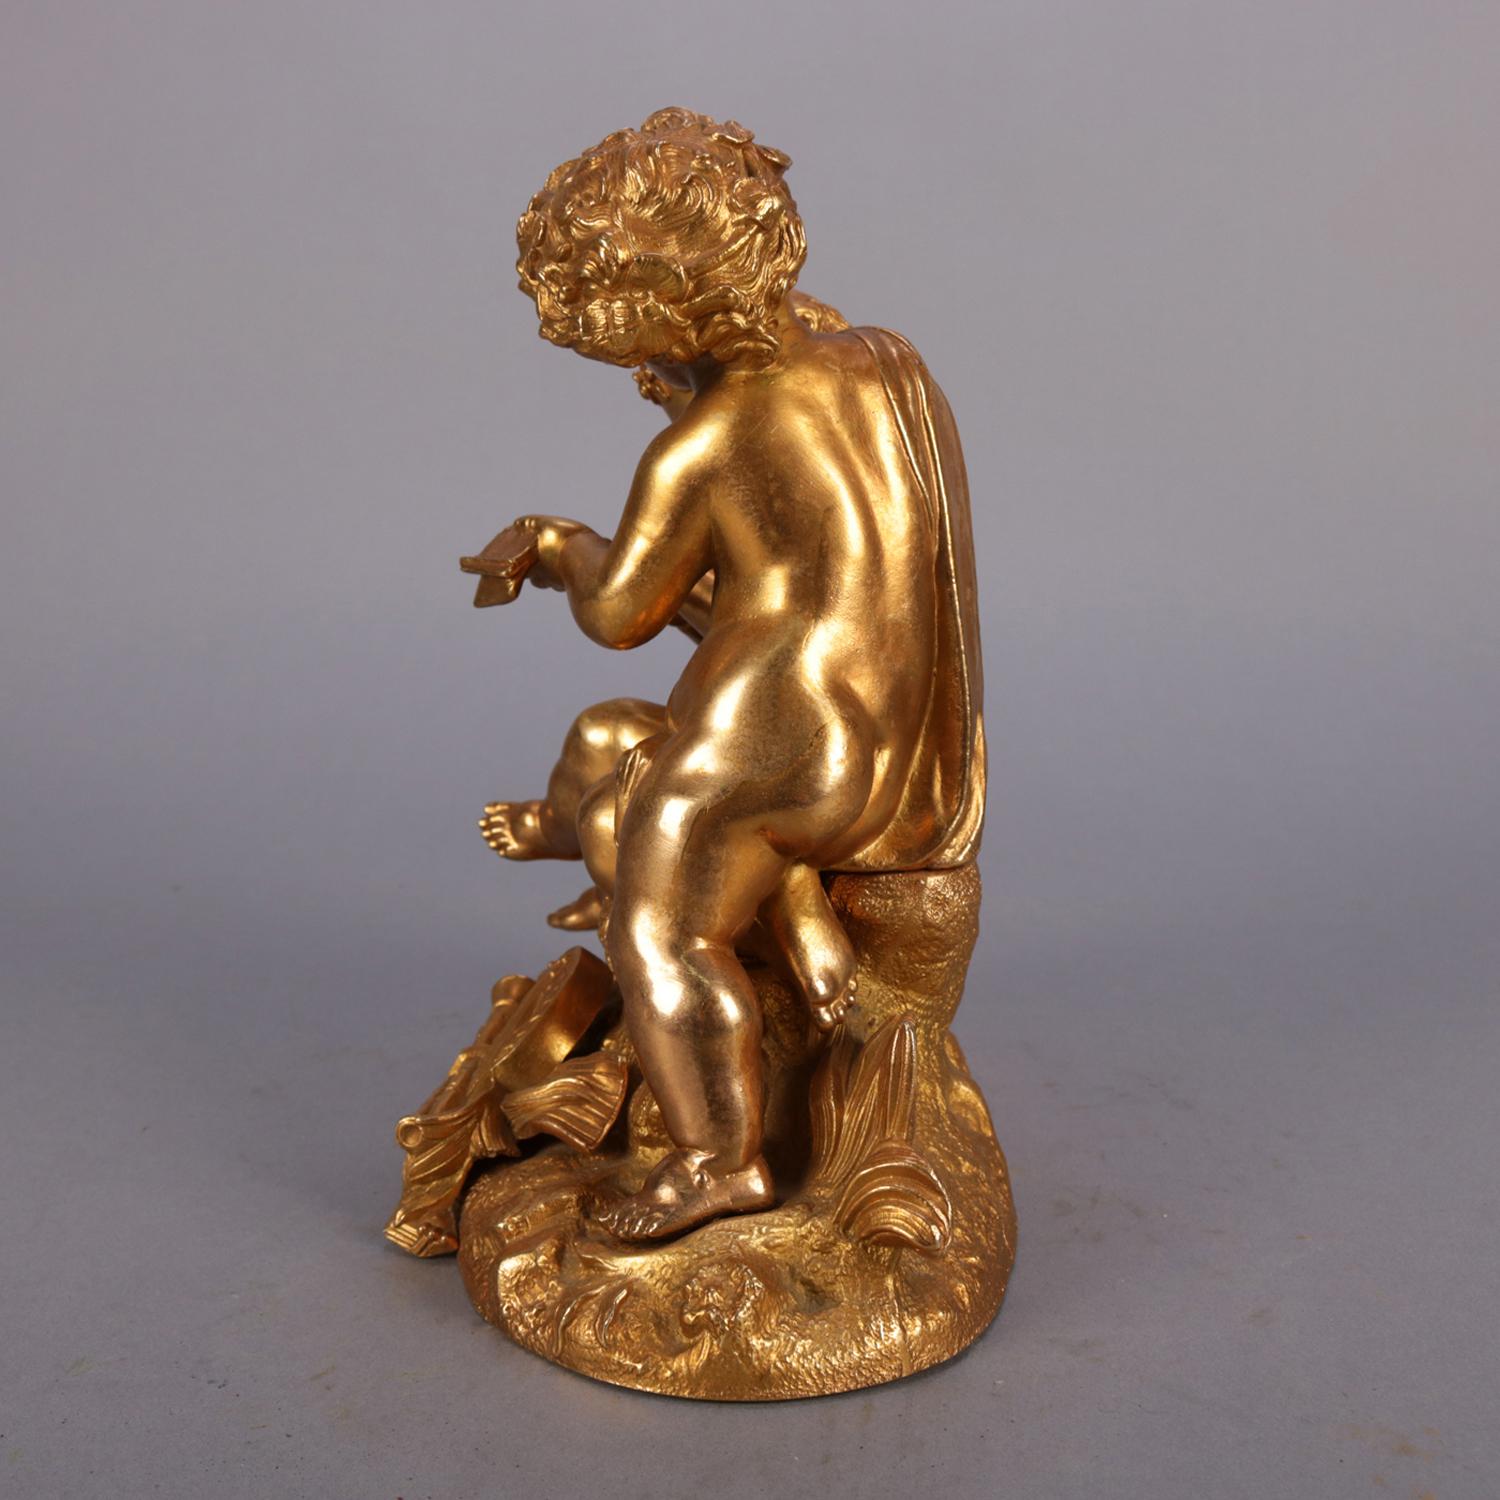 Cast Antique French Classical Gilt Metal Figural Sculpture by PH Mourey, circa 1890